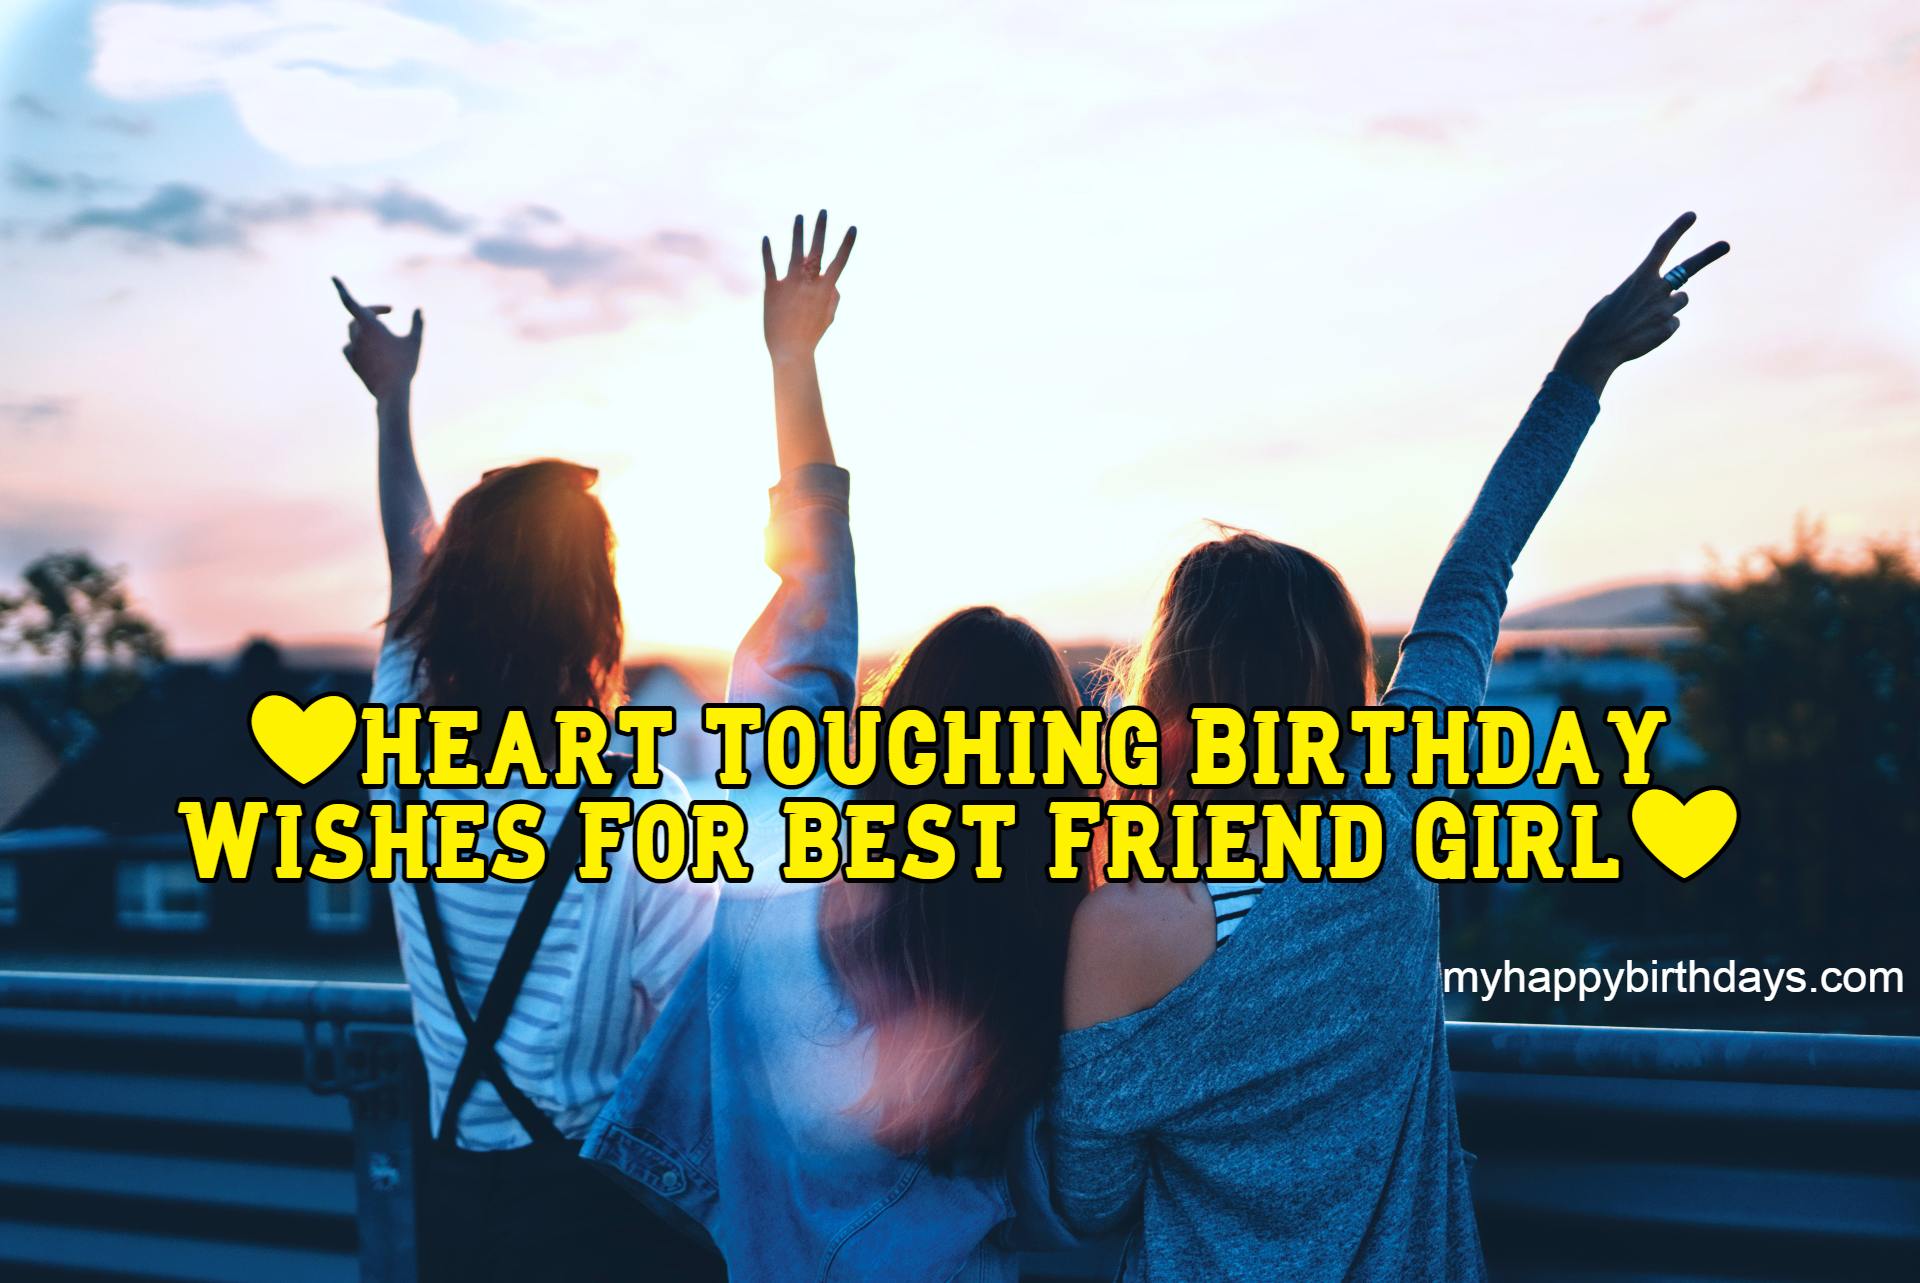 121 Heart Touching Birthday Wishes For Best Friend Girl, Male